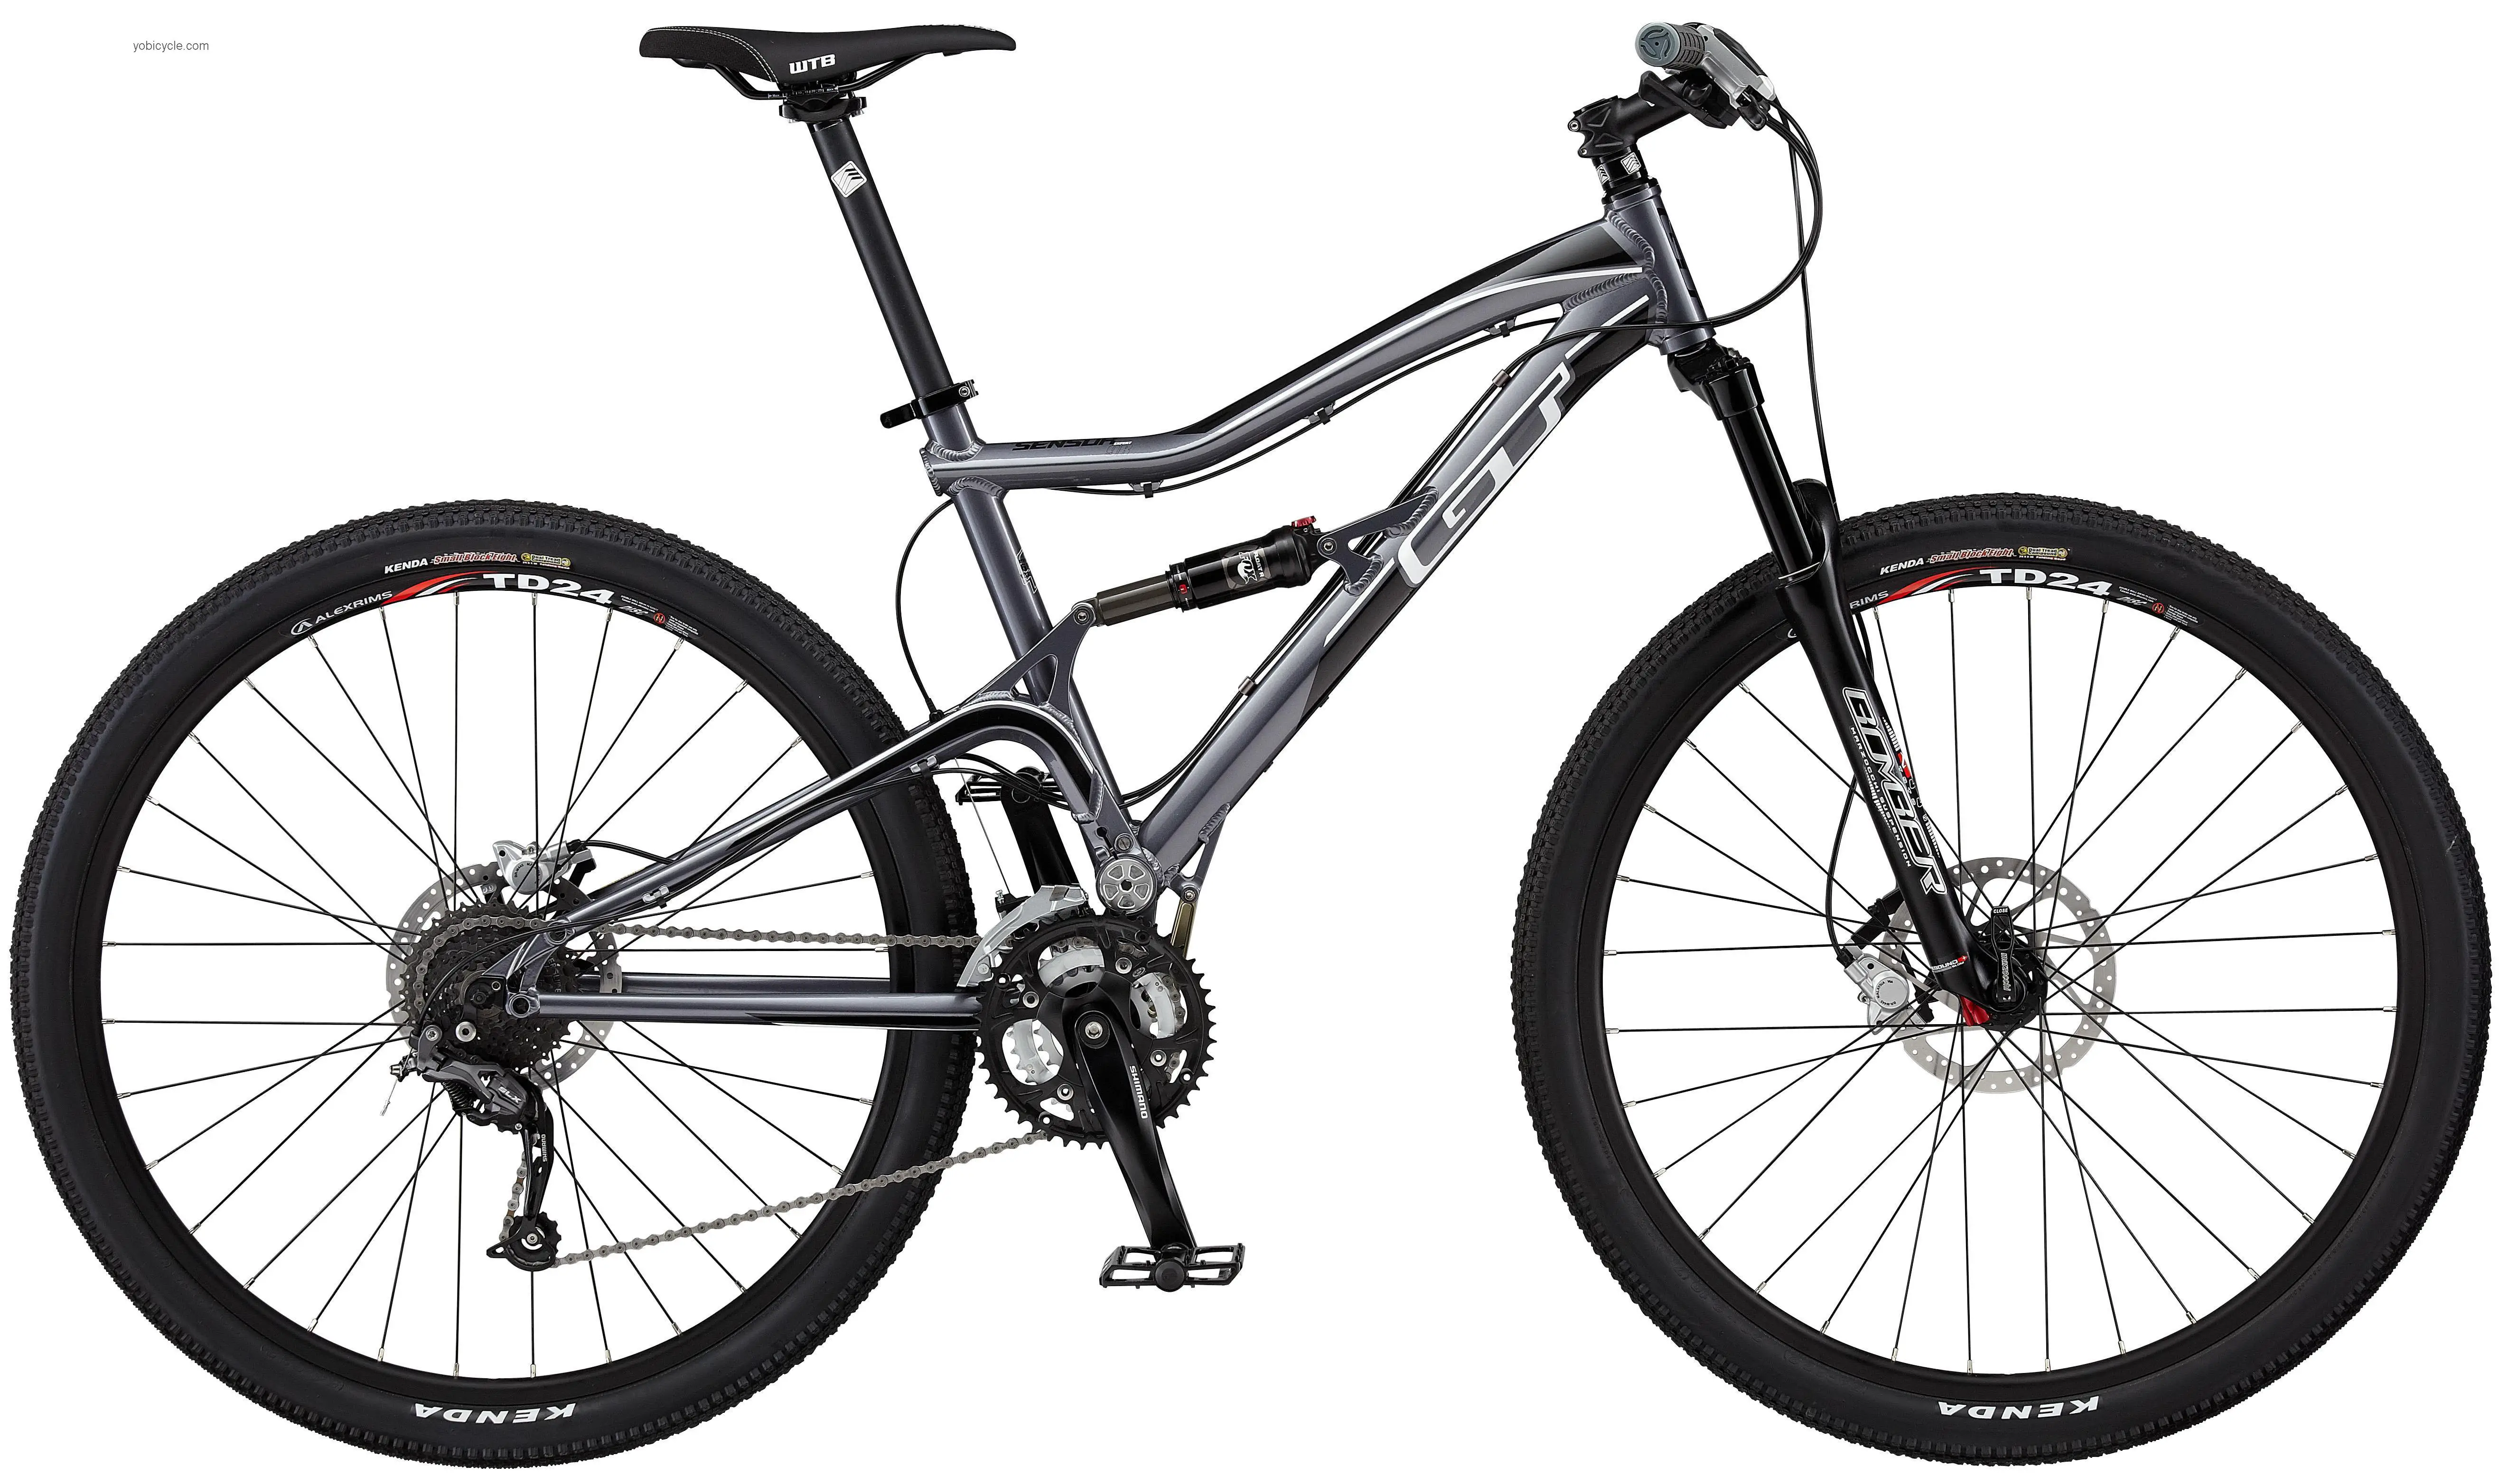 GT Sensor 29er Expert competitors and comparison tool online specs and performance